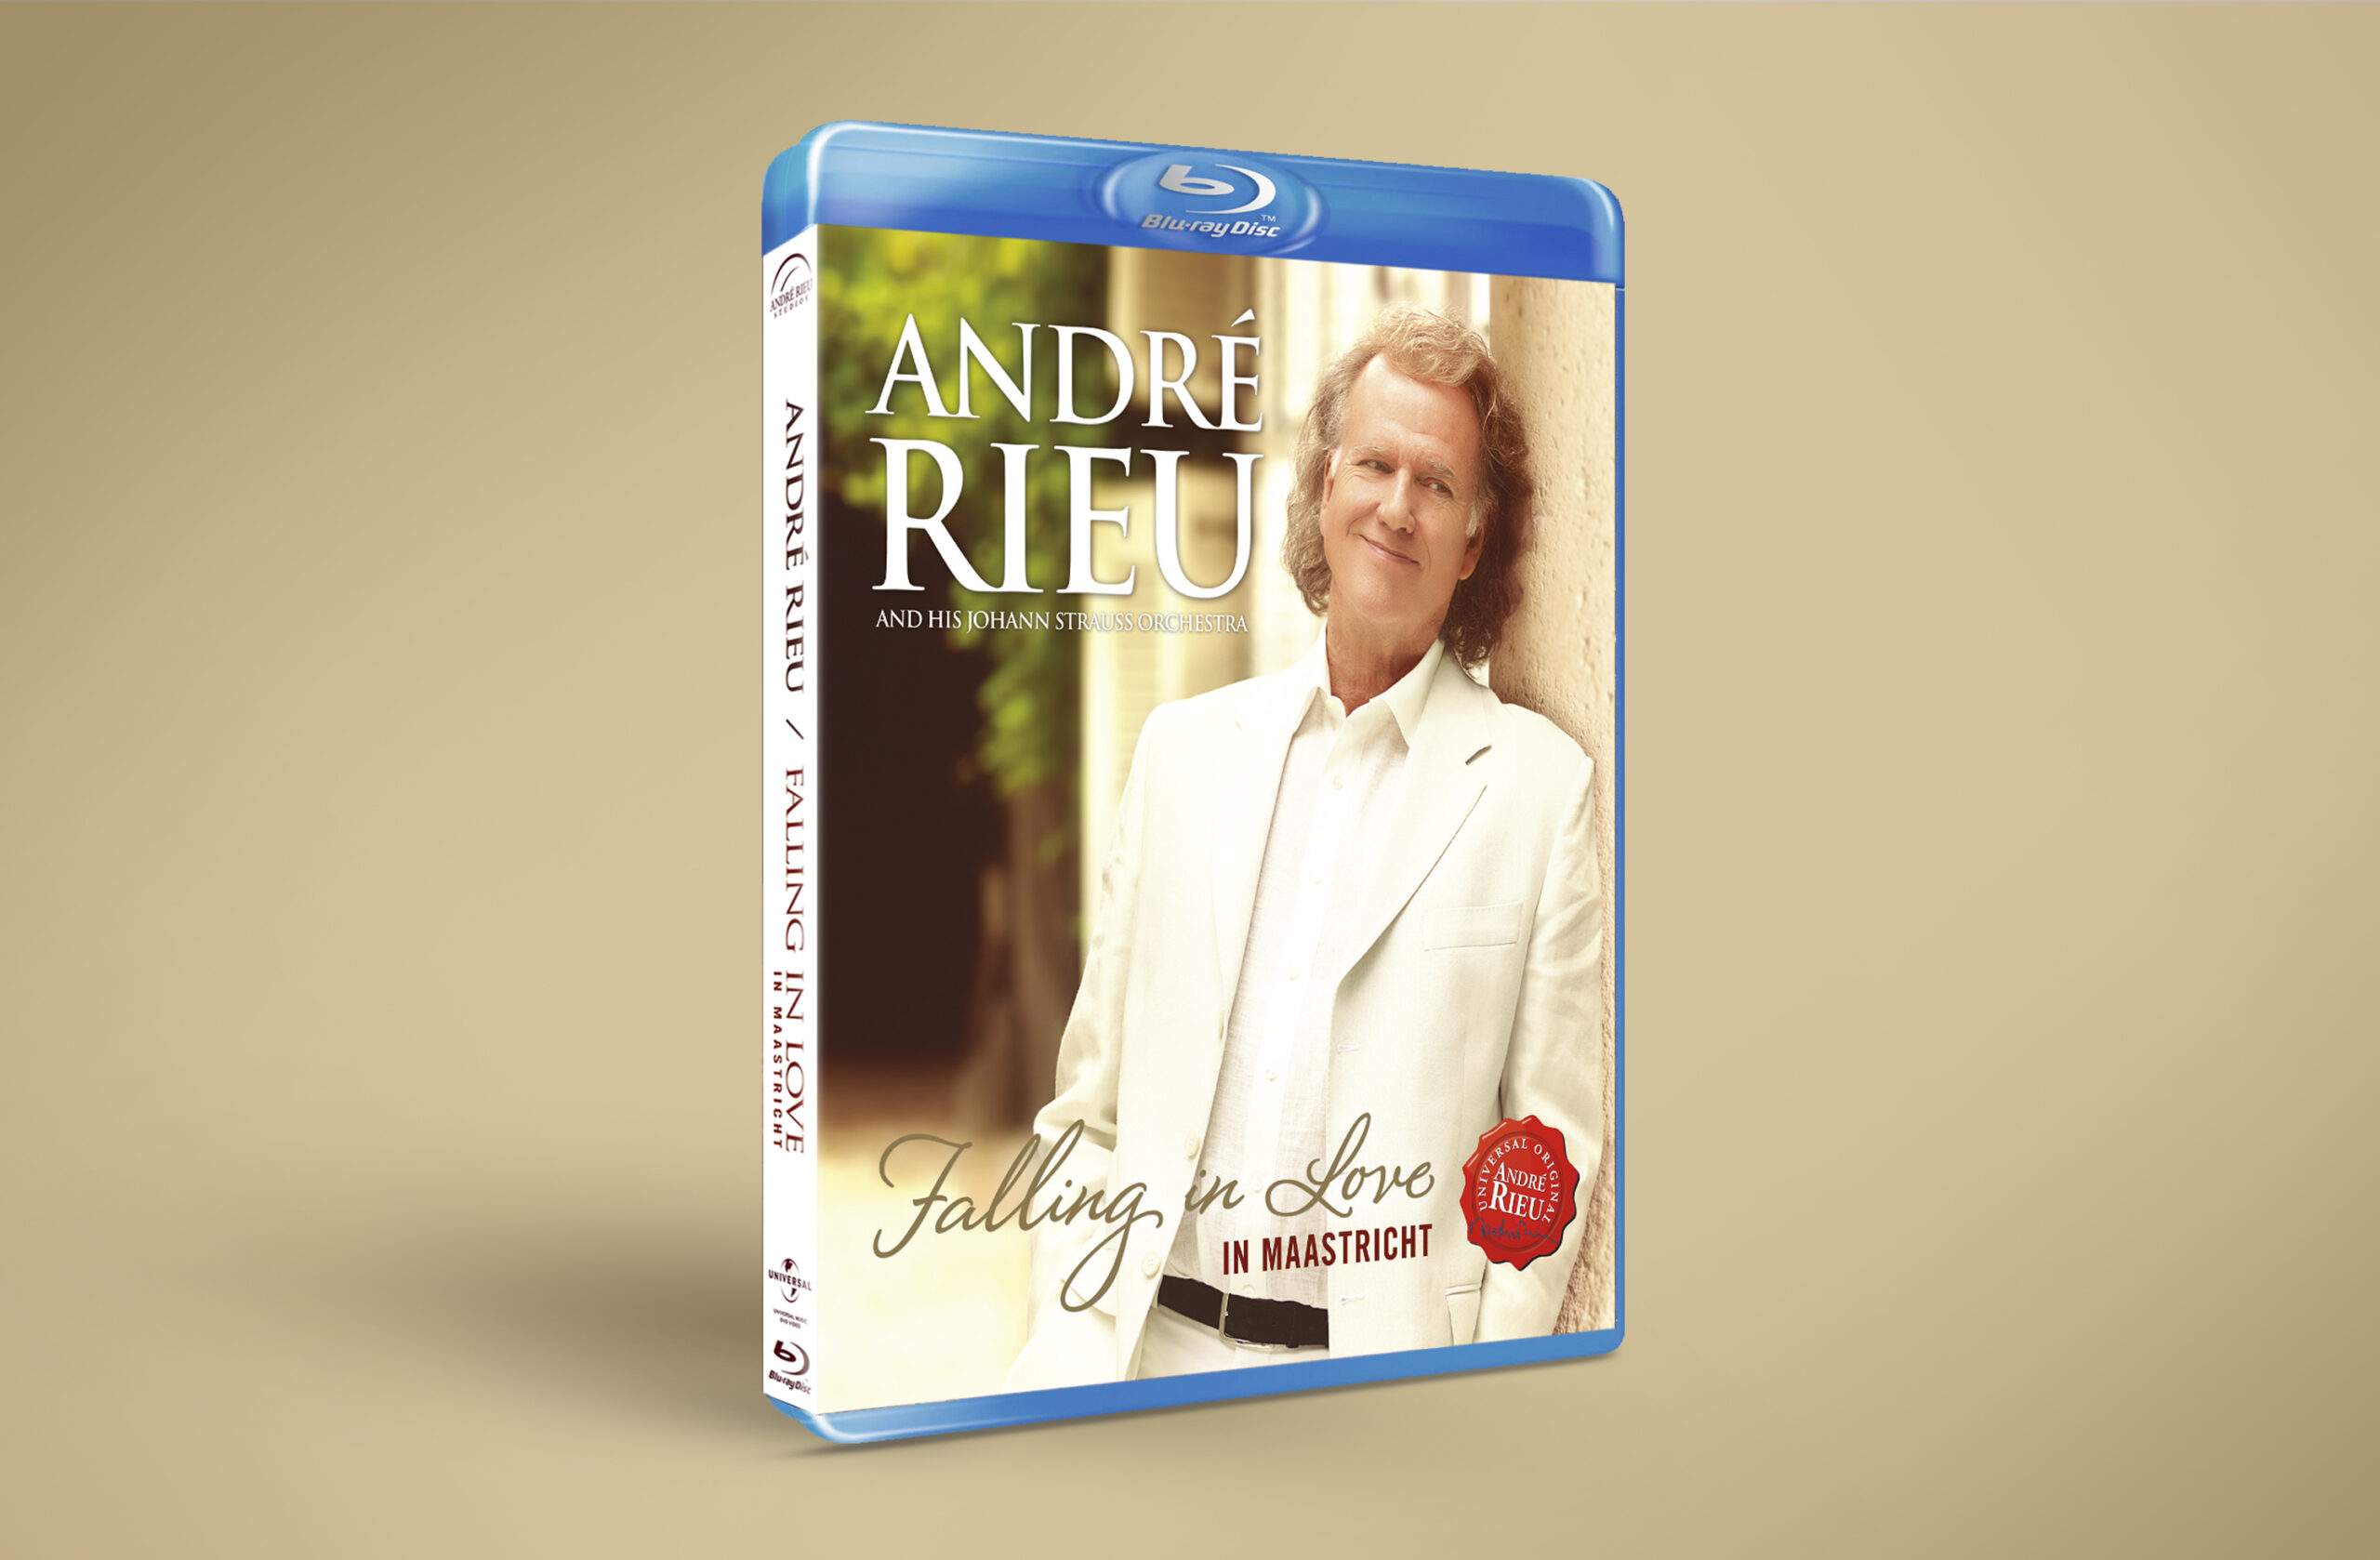 Love　André　(Blu　Maastricht　Live　Falling　2016　Ray)　fanshop　in　Official　in　Rieu